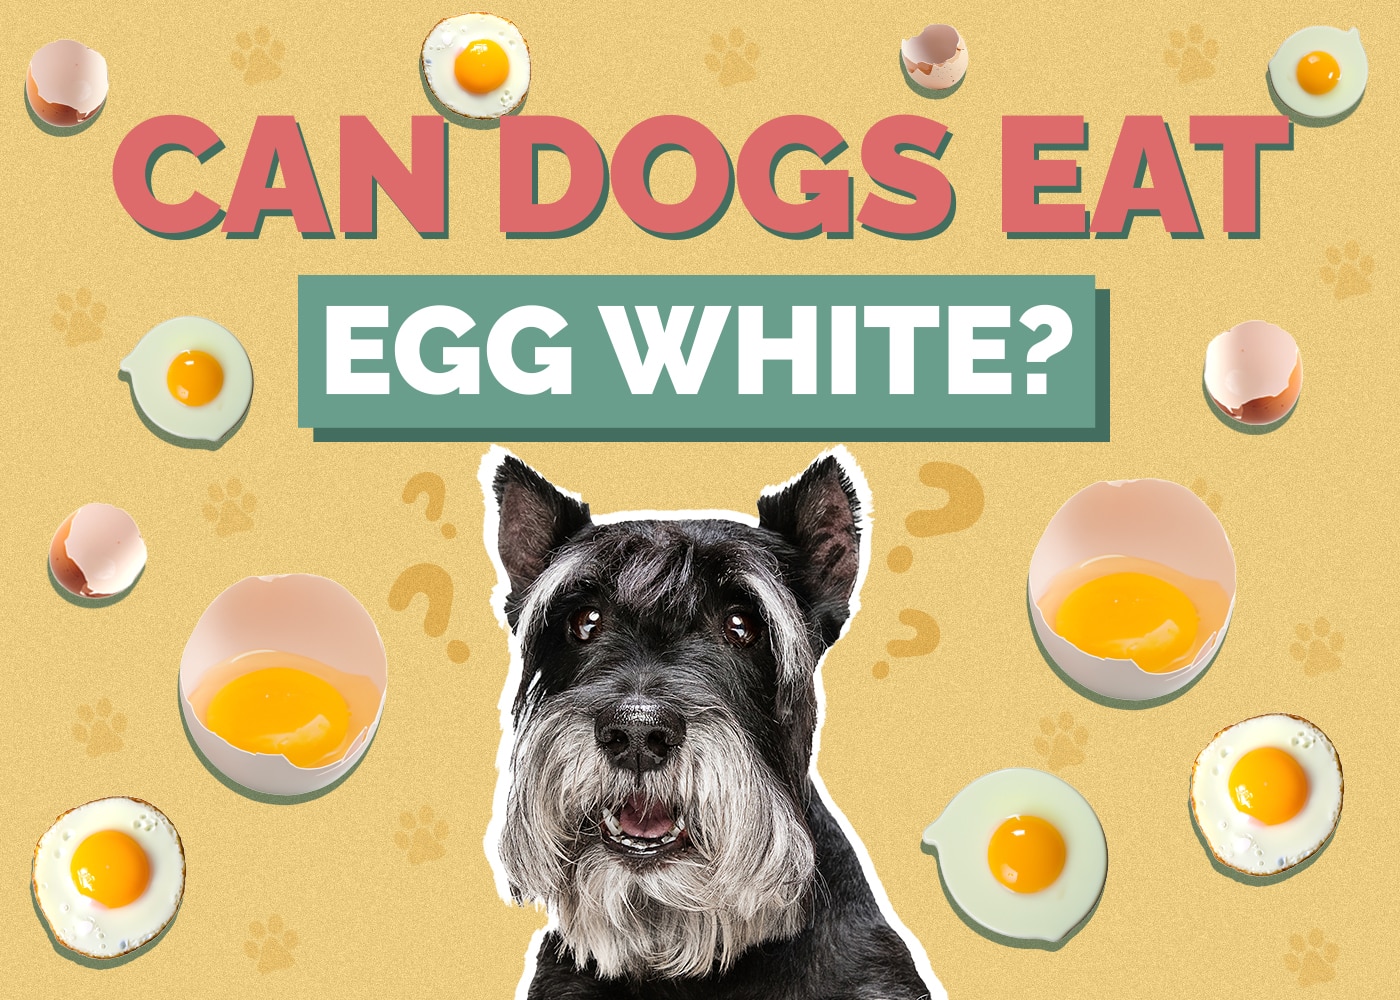 Can Dogs Eat egg-white